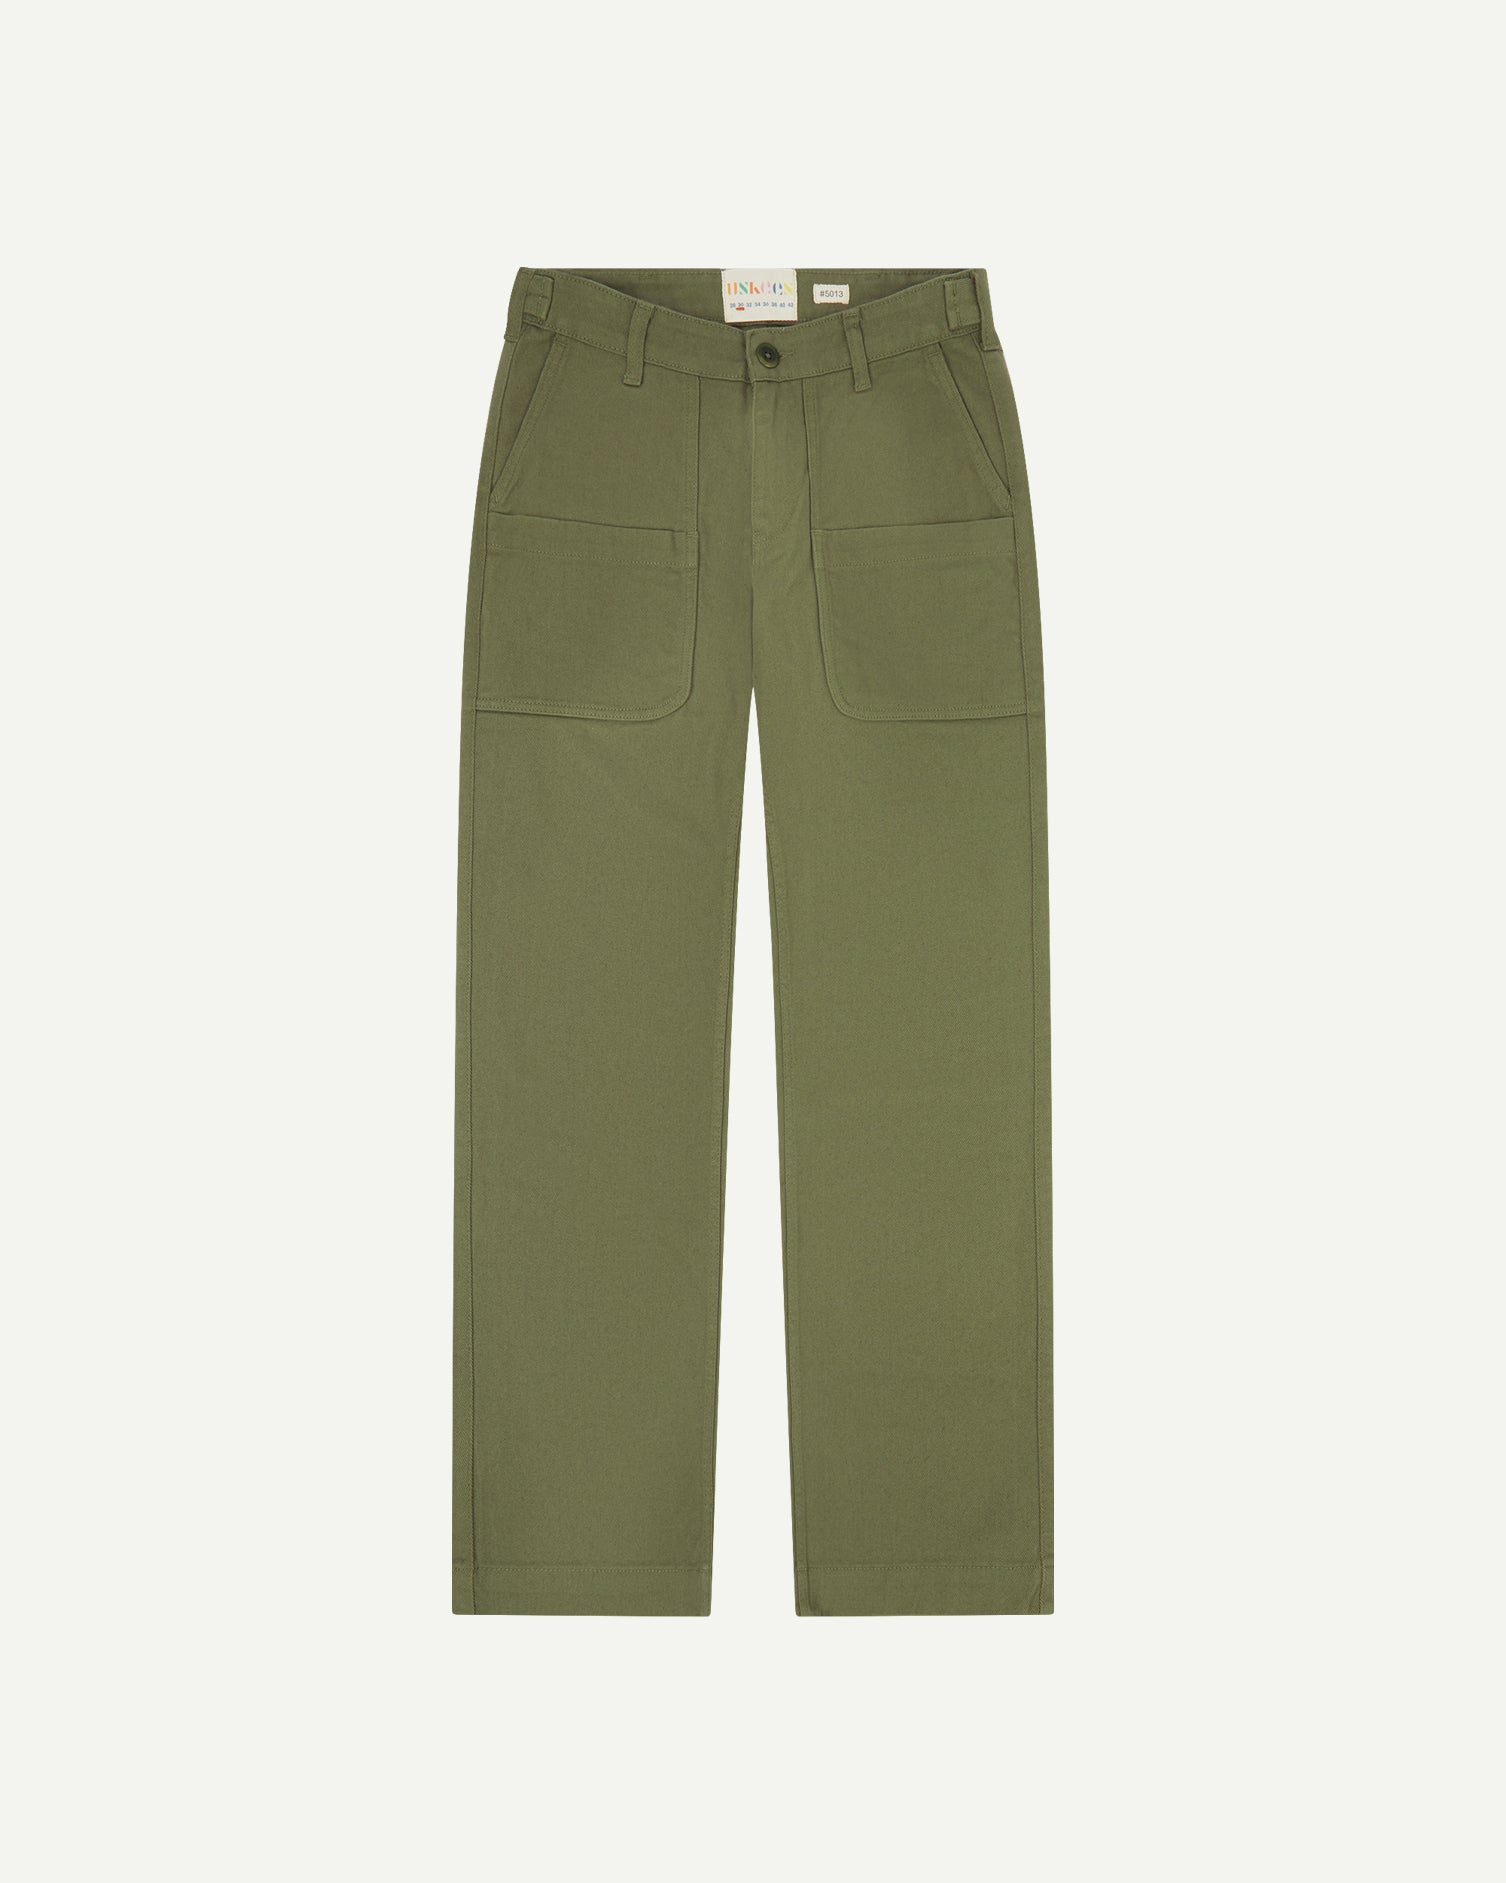 Flat shot of uskees moss drill trousers for men showing label at waistband